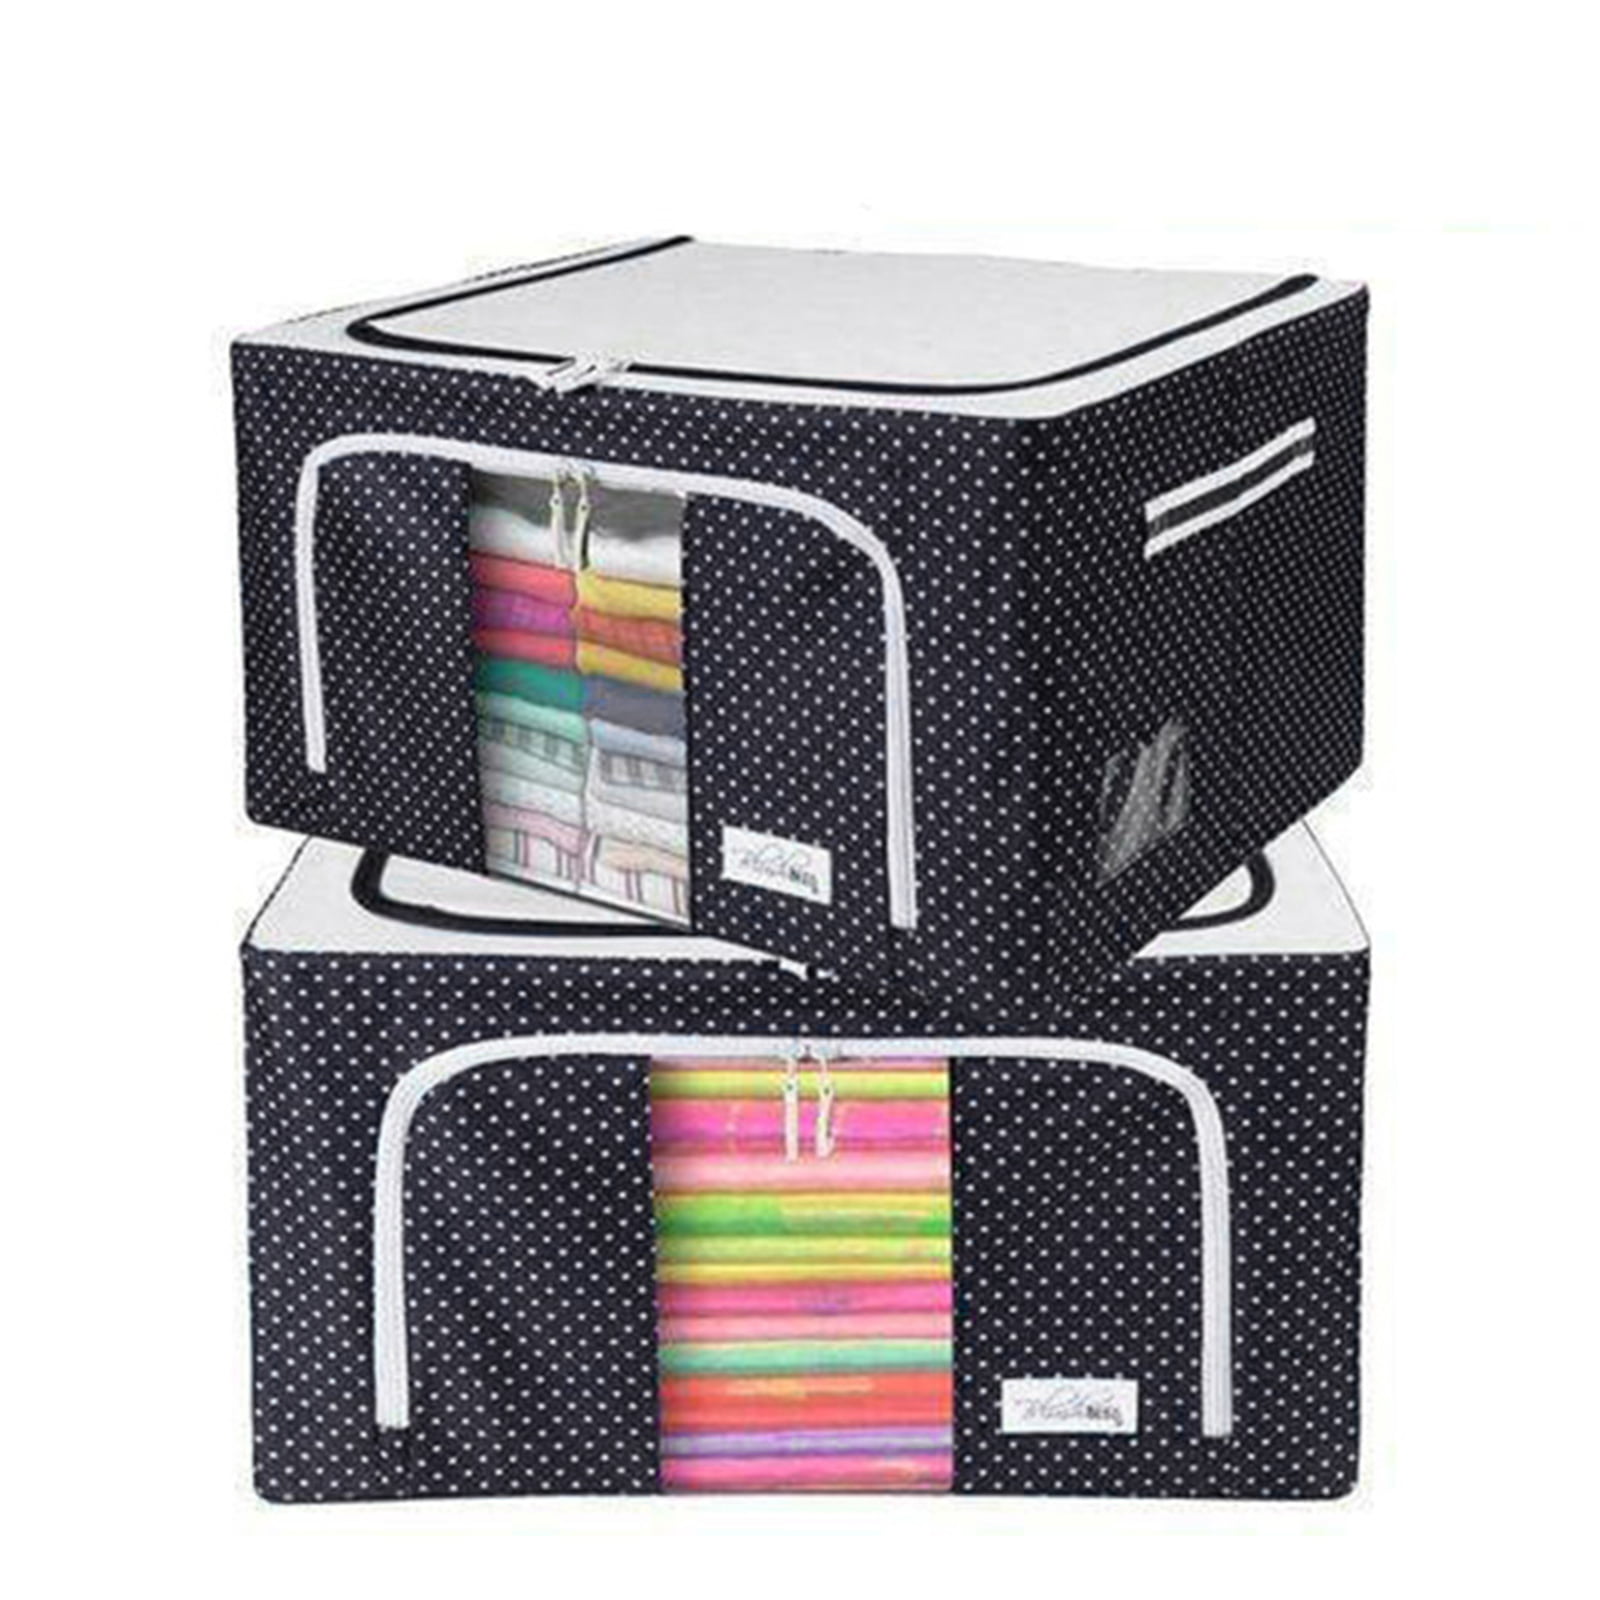 3 Pack Oxford Fabric Storage Bins LivingBox Foldable Storage Containers Fabric See-Through Window Household Home Organizers